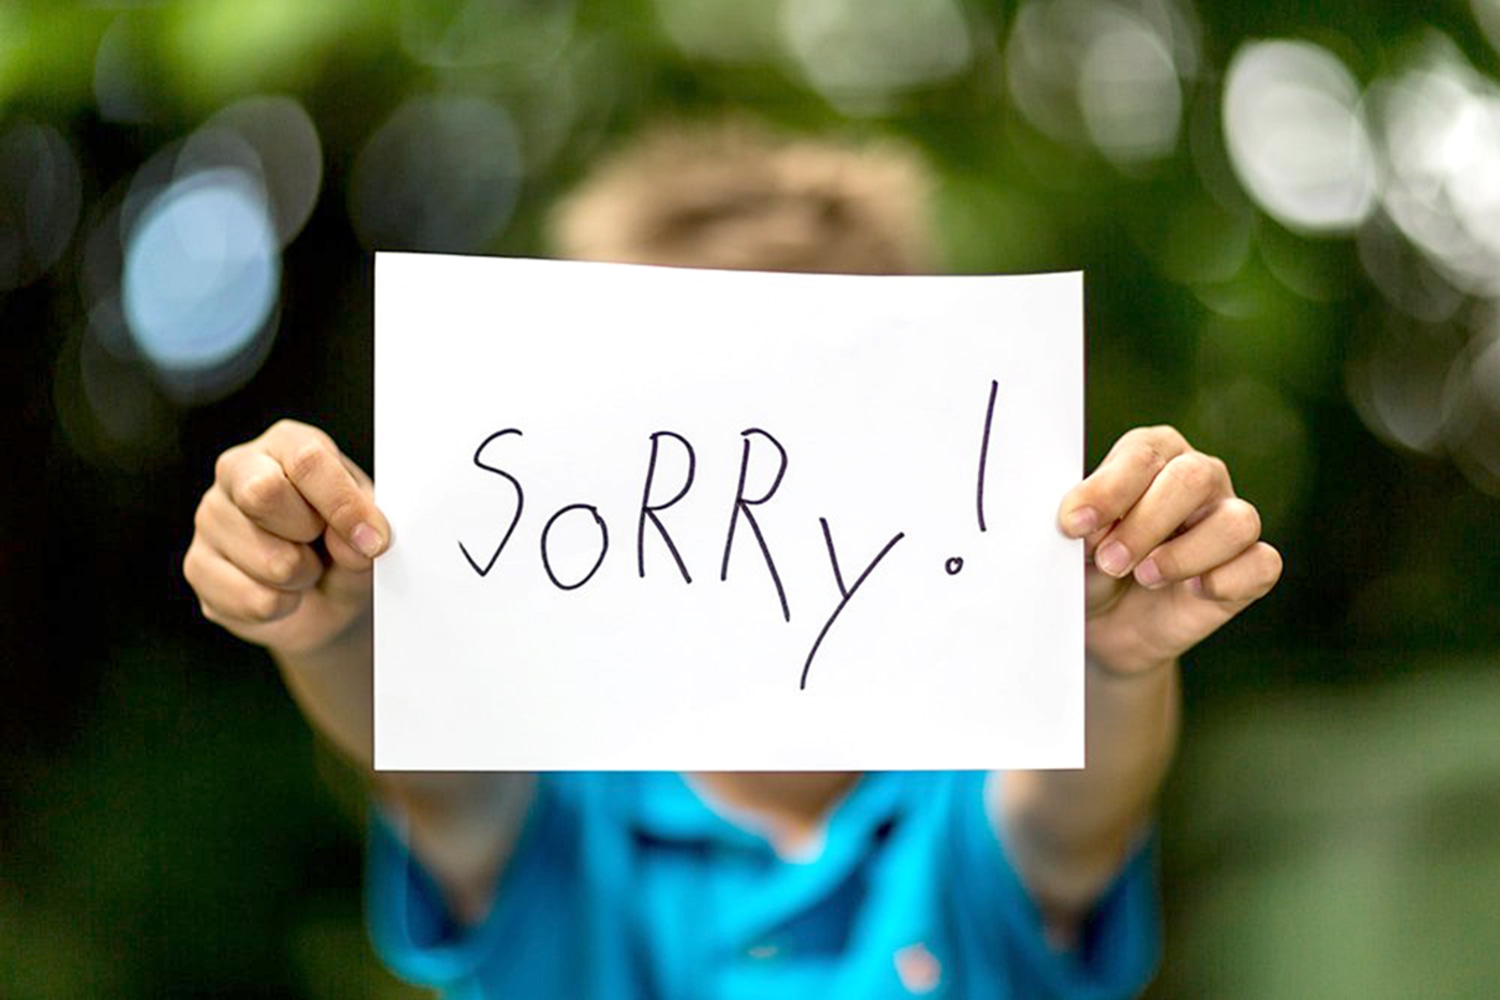 Five Other Ways To Say “Sorry To Bother You” in an Email